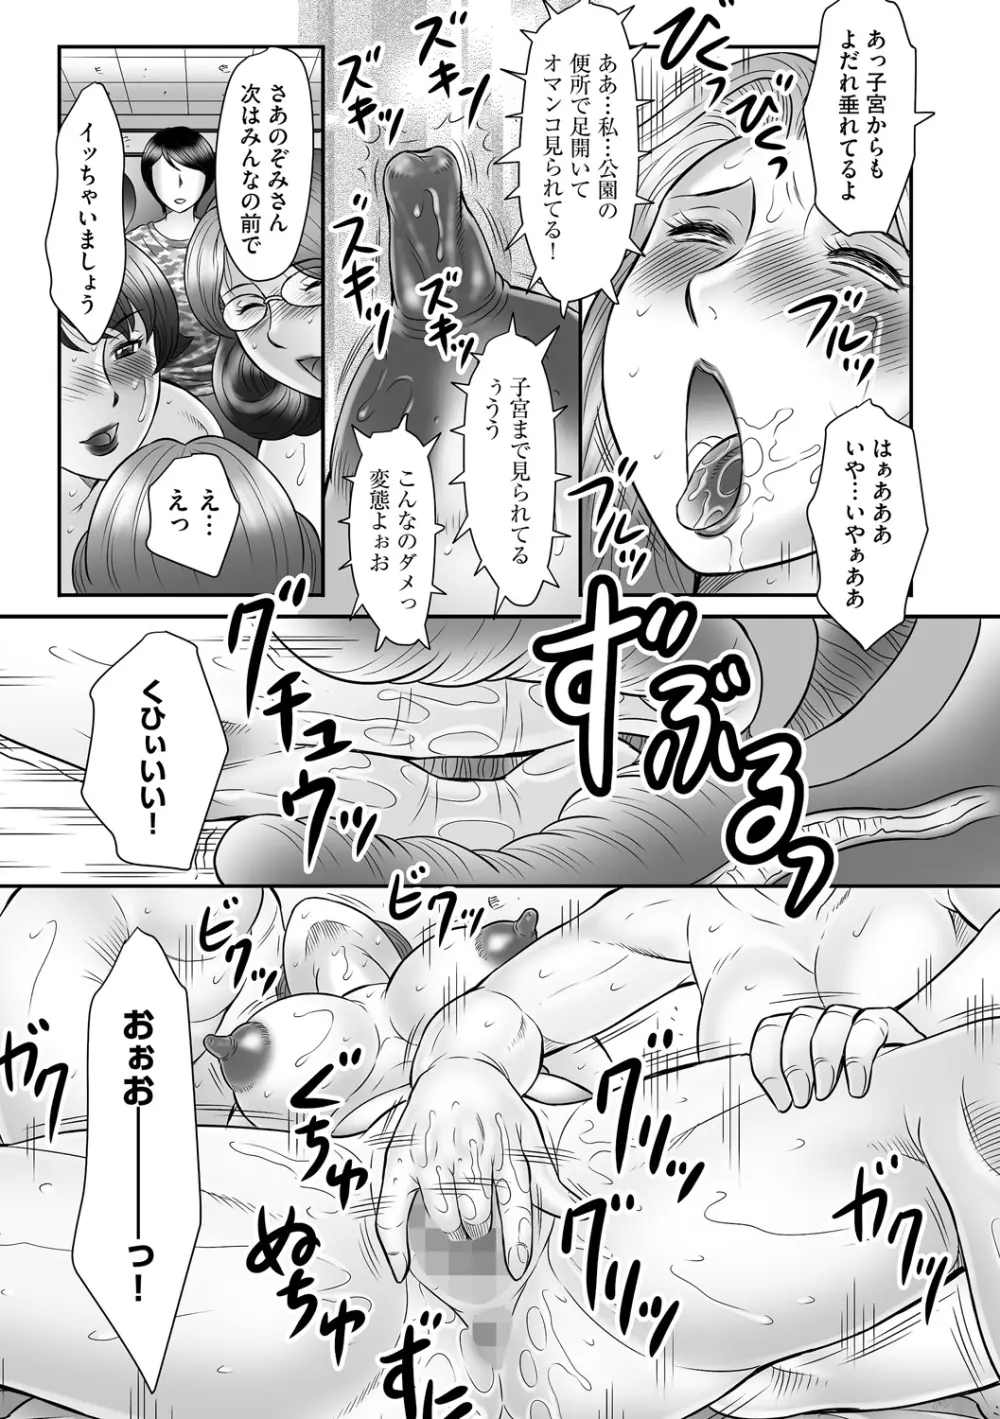 Boshi no Susume – The Advice of The mother And Child Ch. 16 5ページ